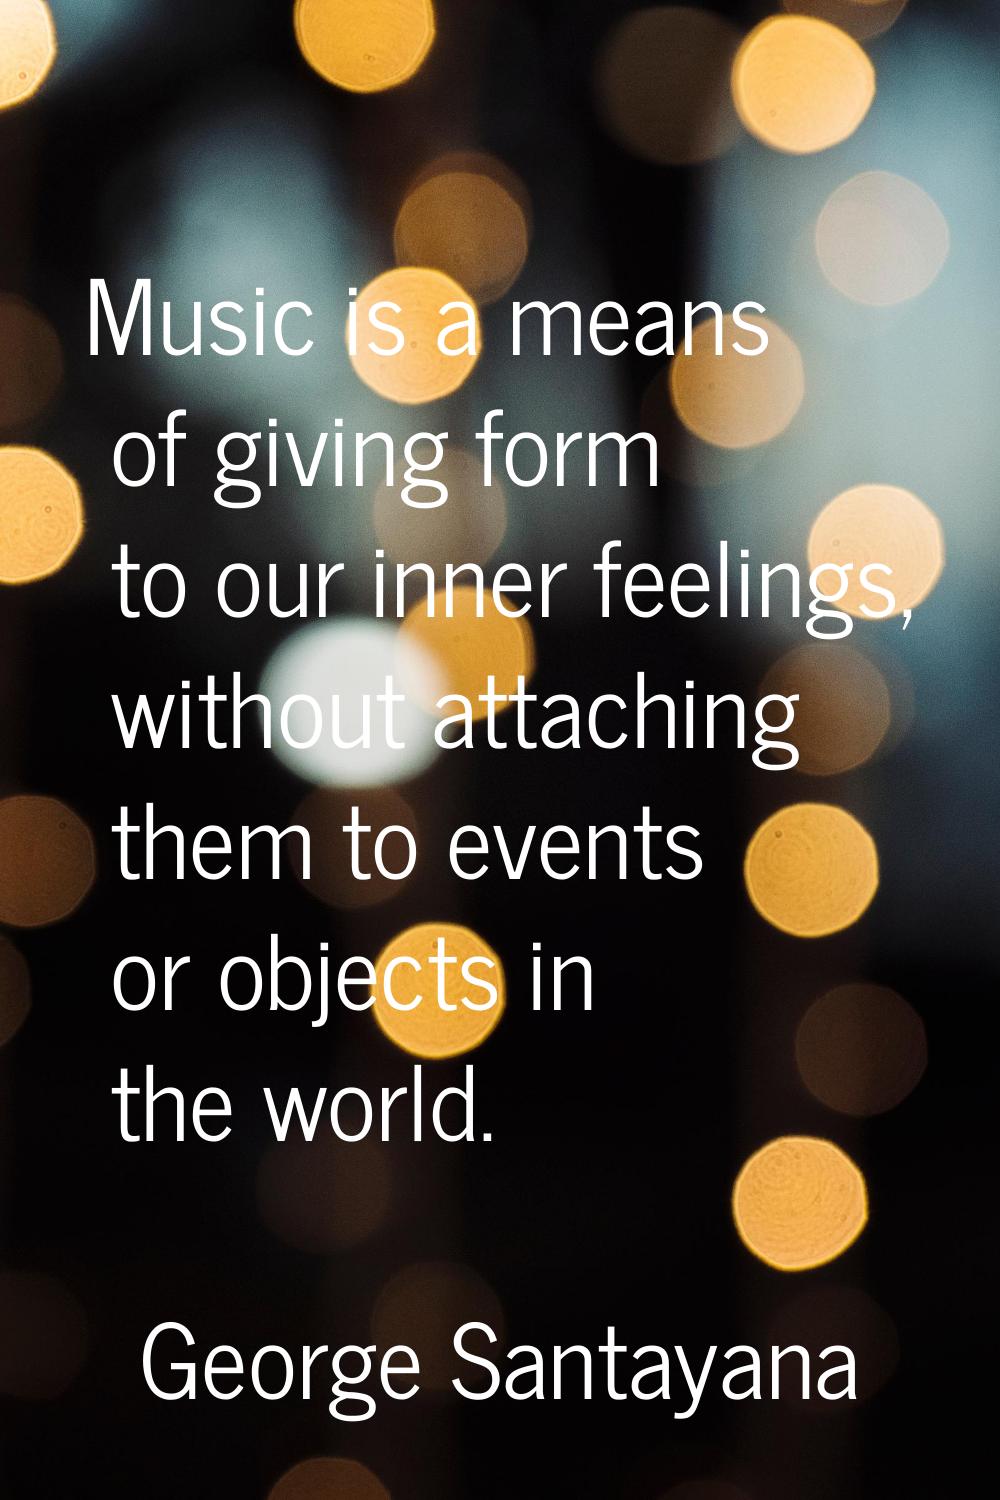 Music is a means of giving form to our inner feelings, without attaching them to events or objects 